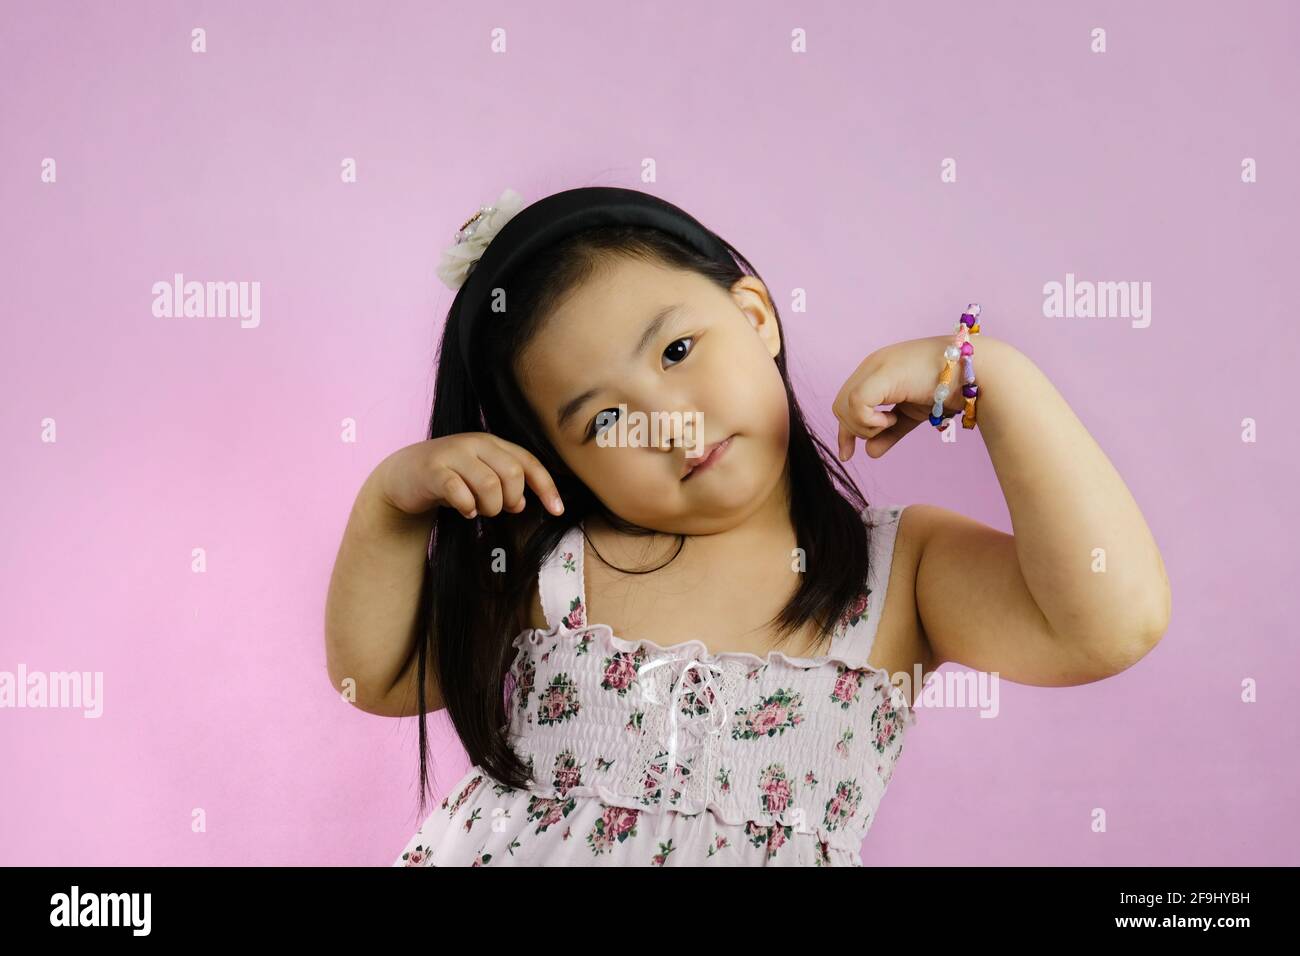 A cute young chubby Asian girl is posing, showing off her biceps to show how strong she is. Bright pink background. Stock Photo